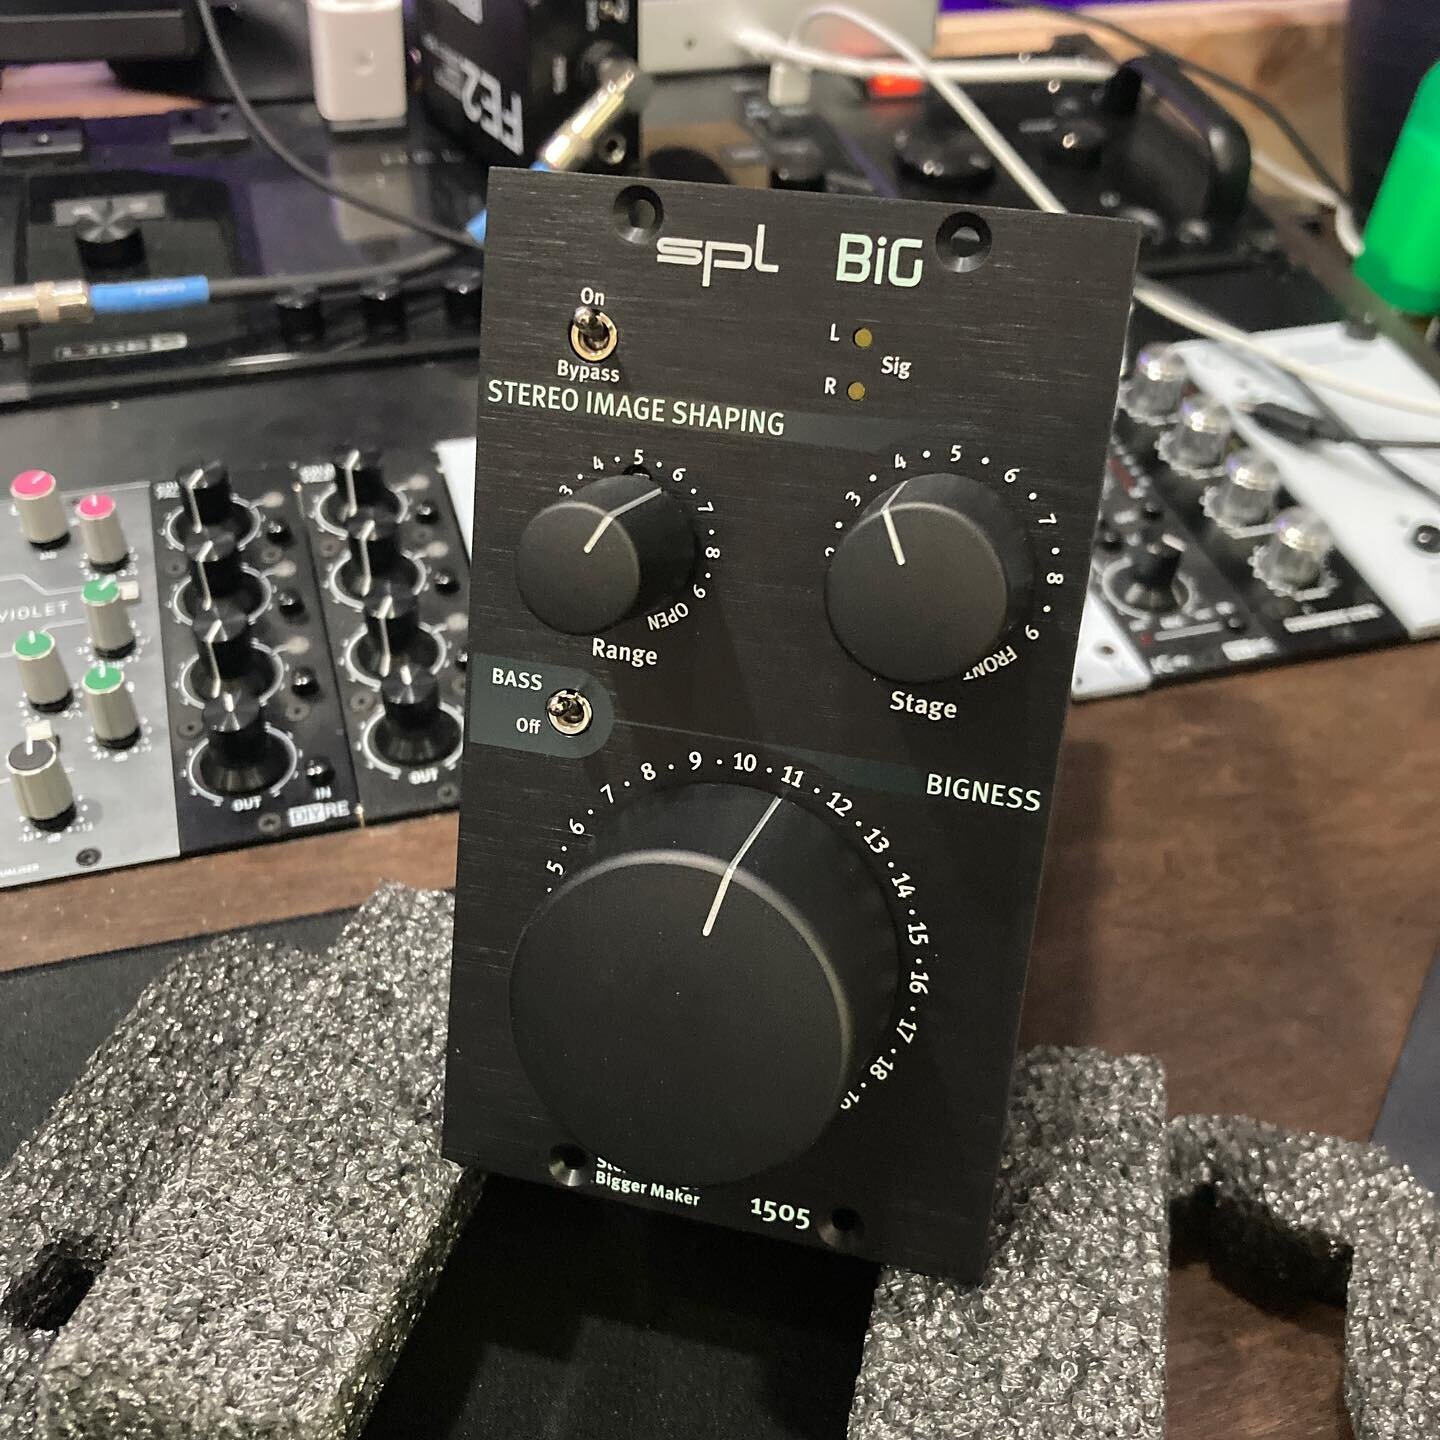 SPL big added to the master chain #audioengineer #masteringengineer #mixingengineer #mixingandmastering